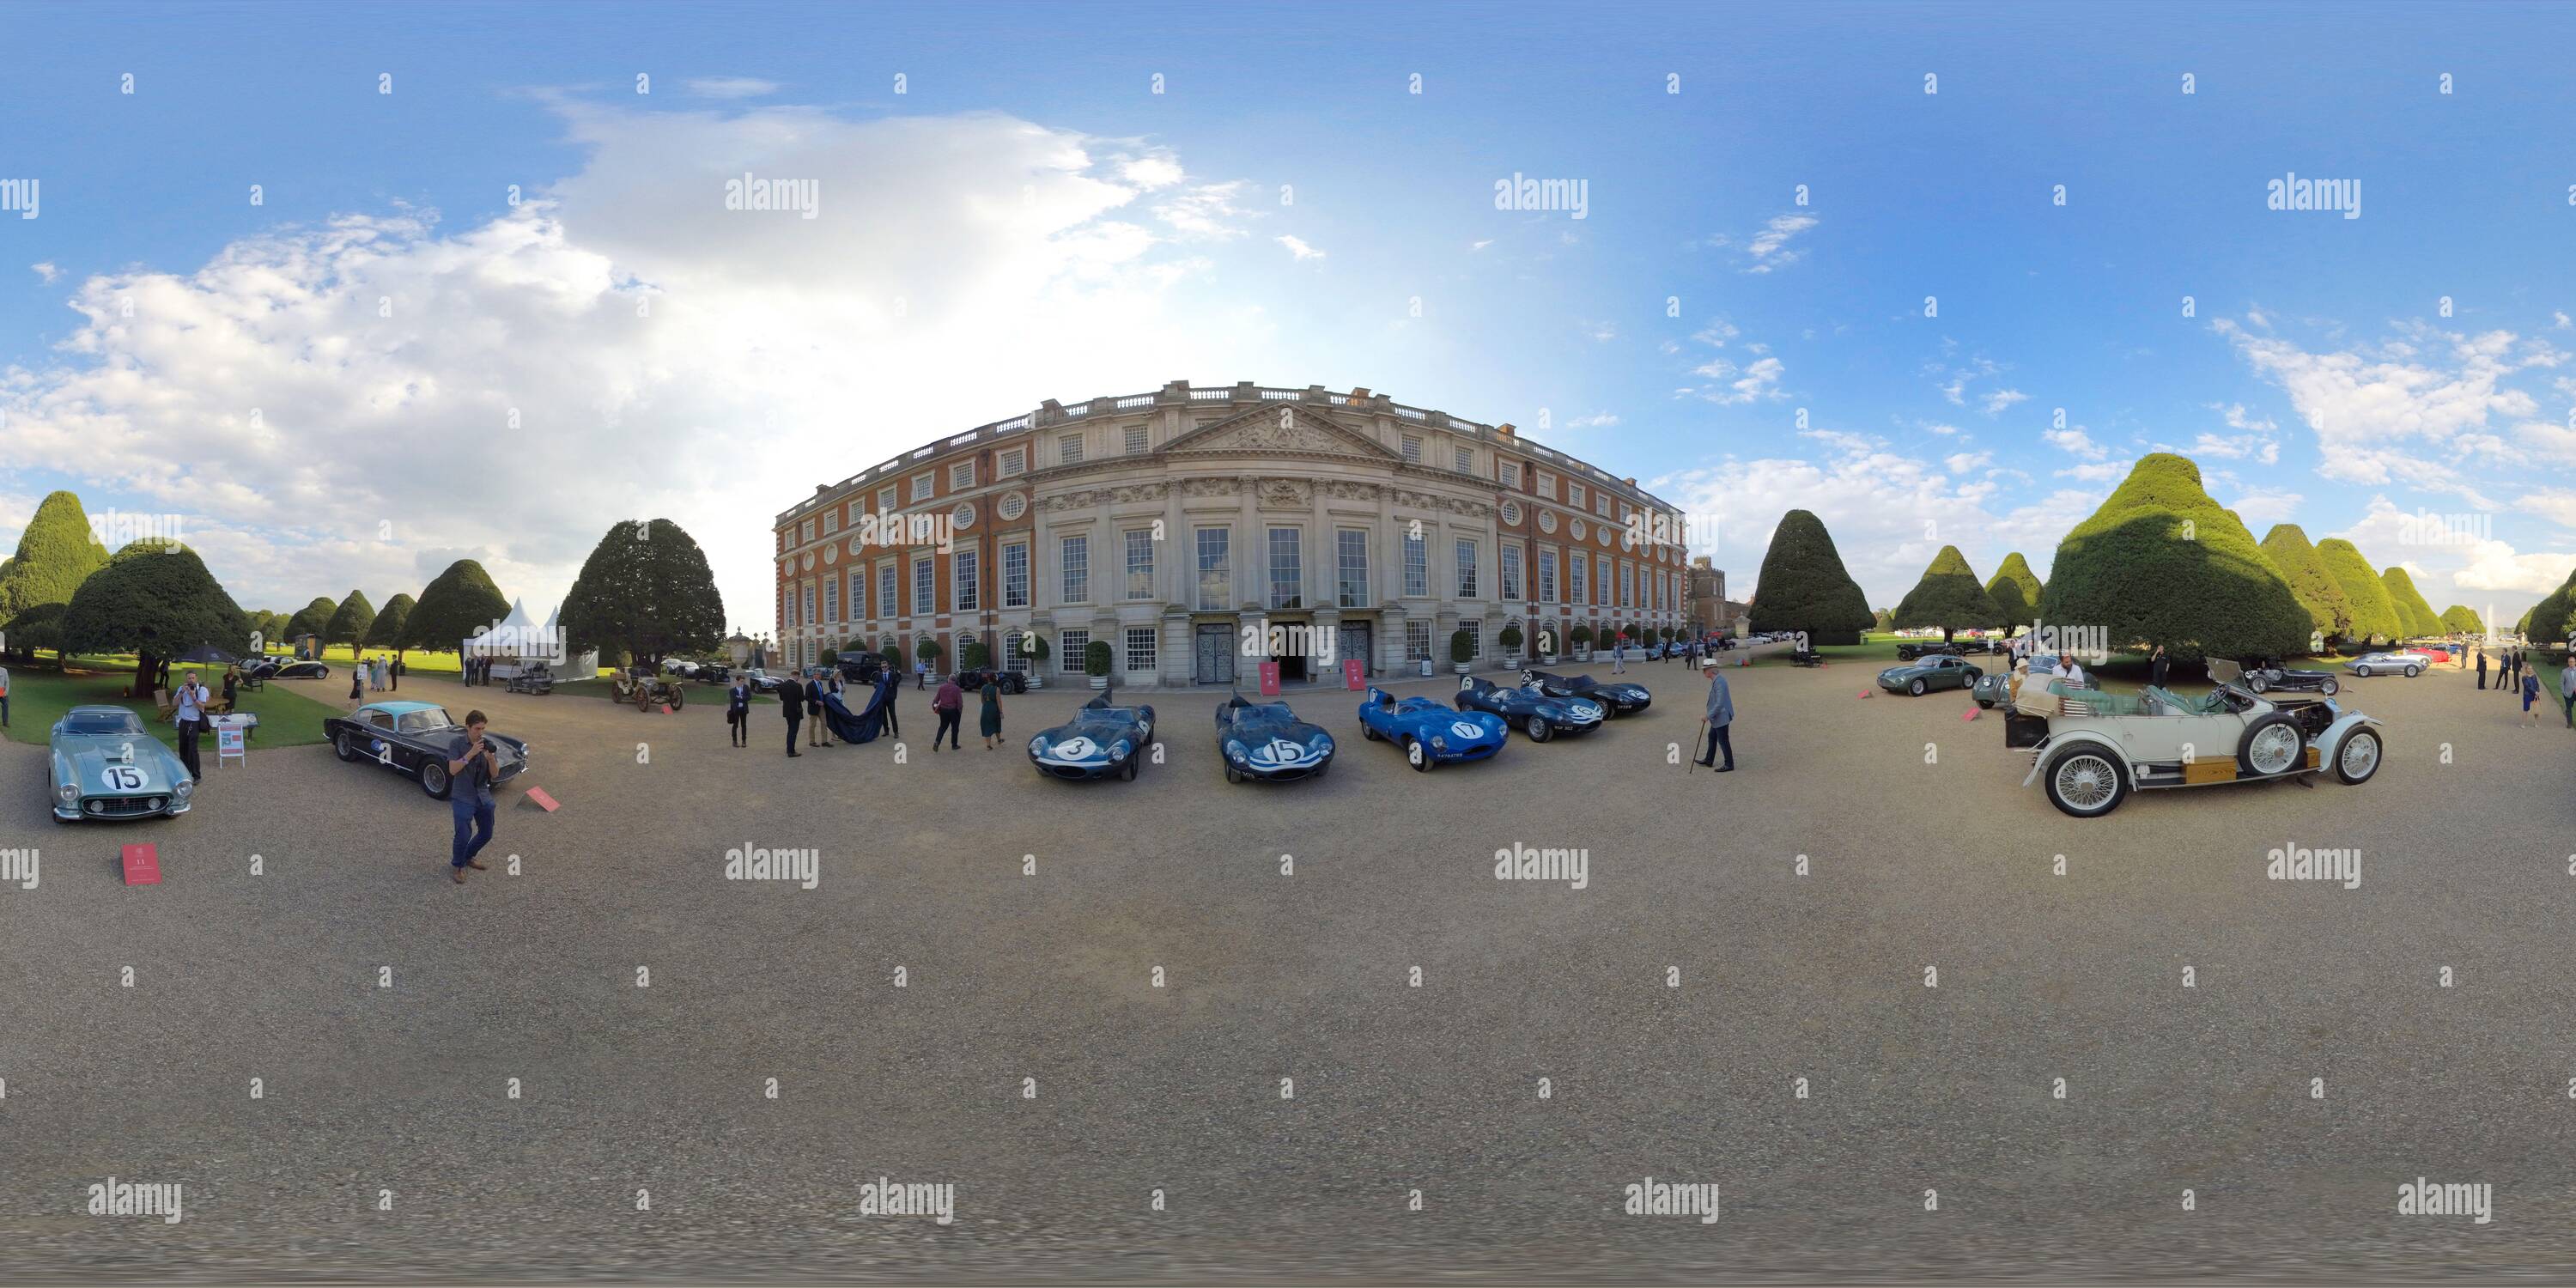 360 degree panoramic view of CLASSIC CARS ON DISPLAY AT HAMPTON COURT PALACE, ENGLAND . PHOTO CREDIT : © MARK PAIN / ALAMY STOCK PHOTO